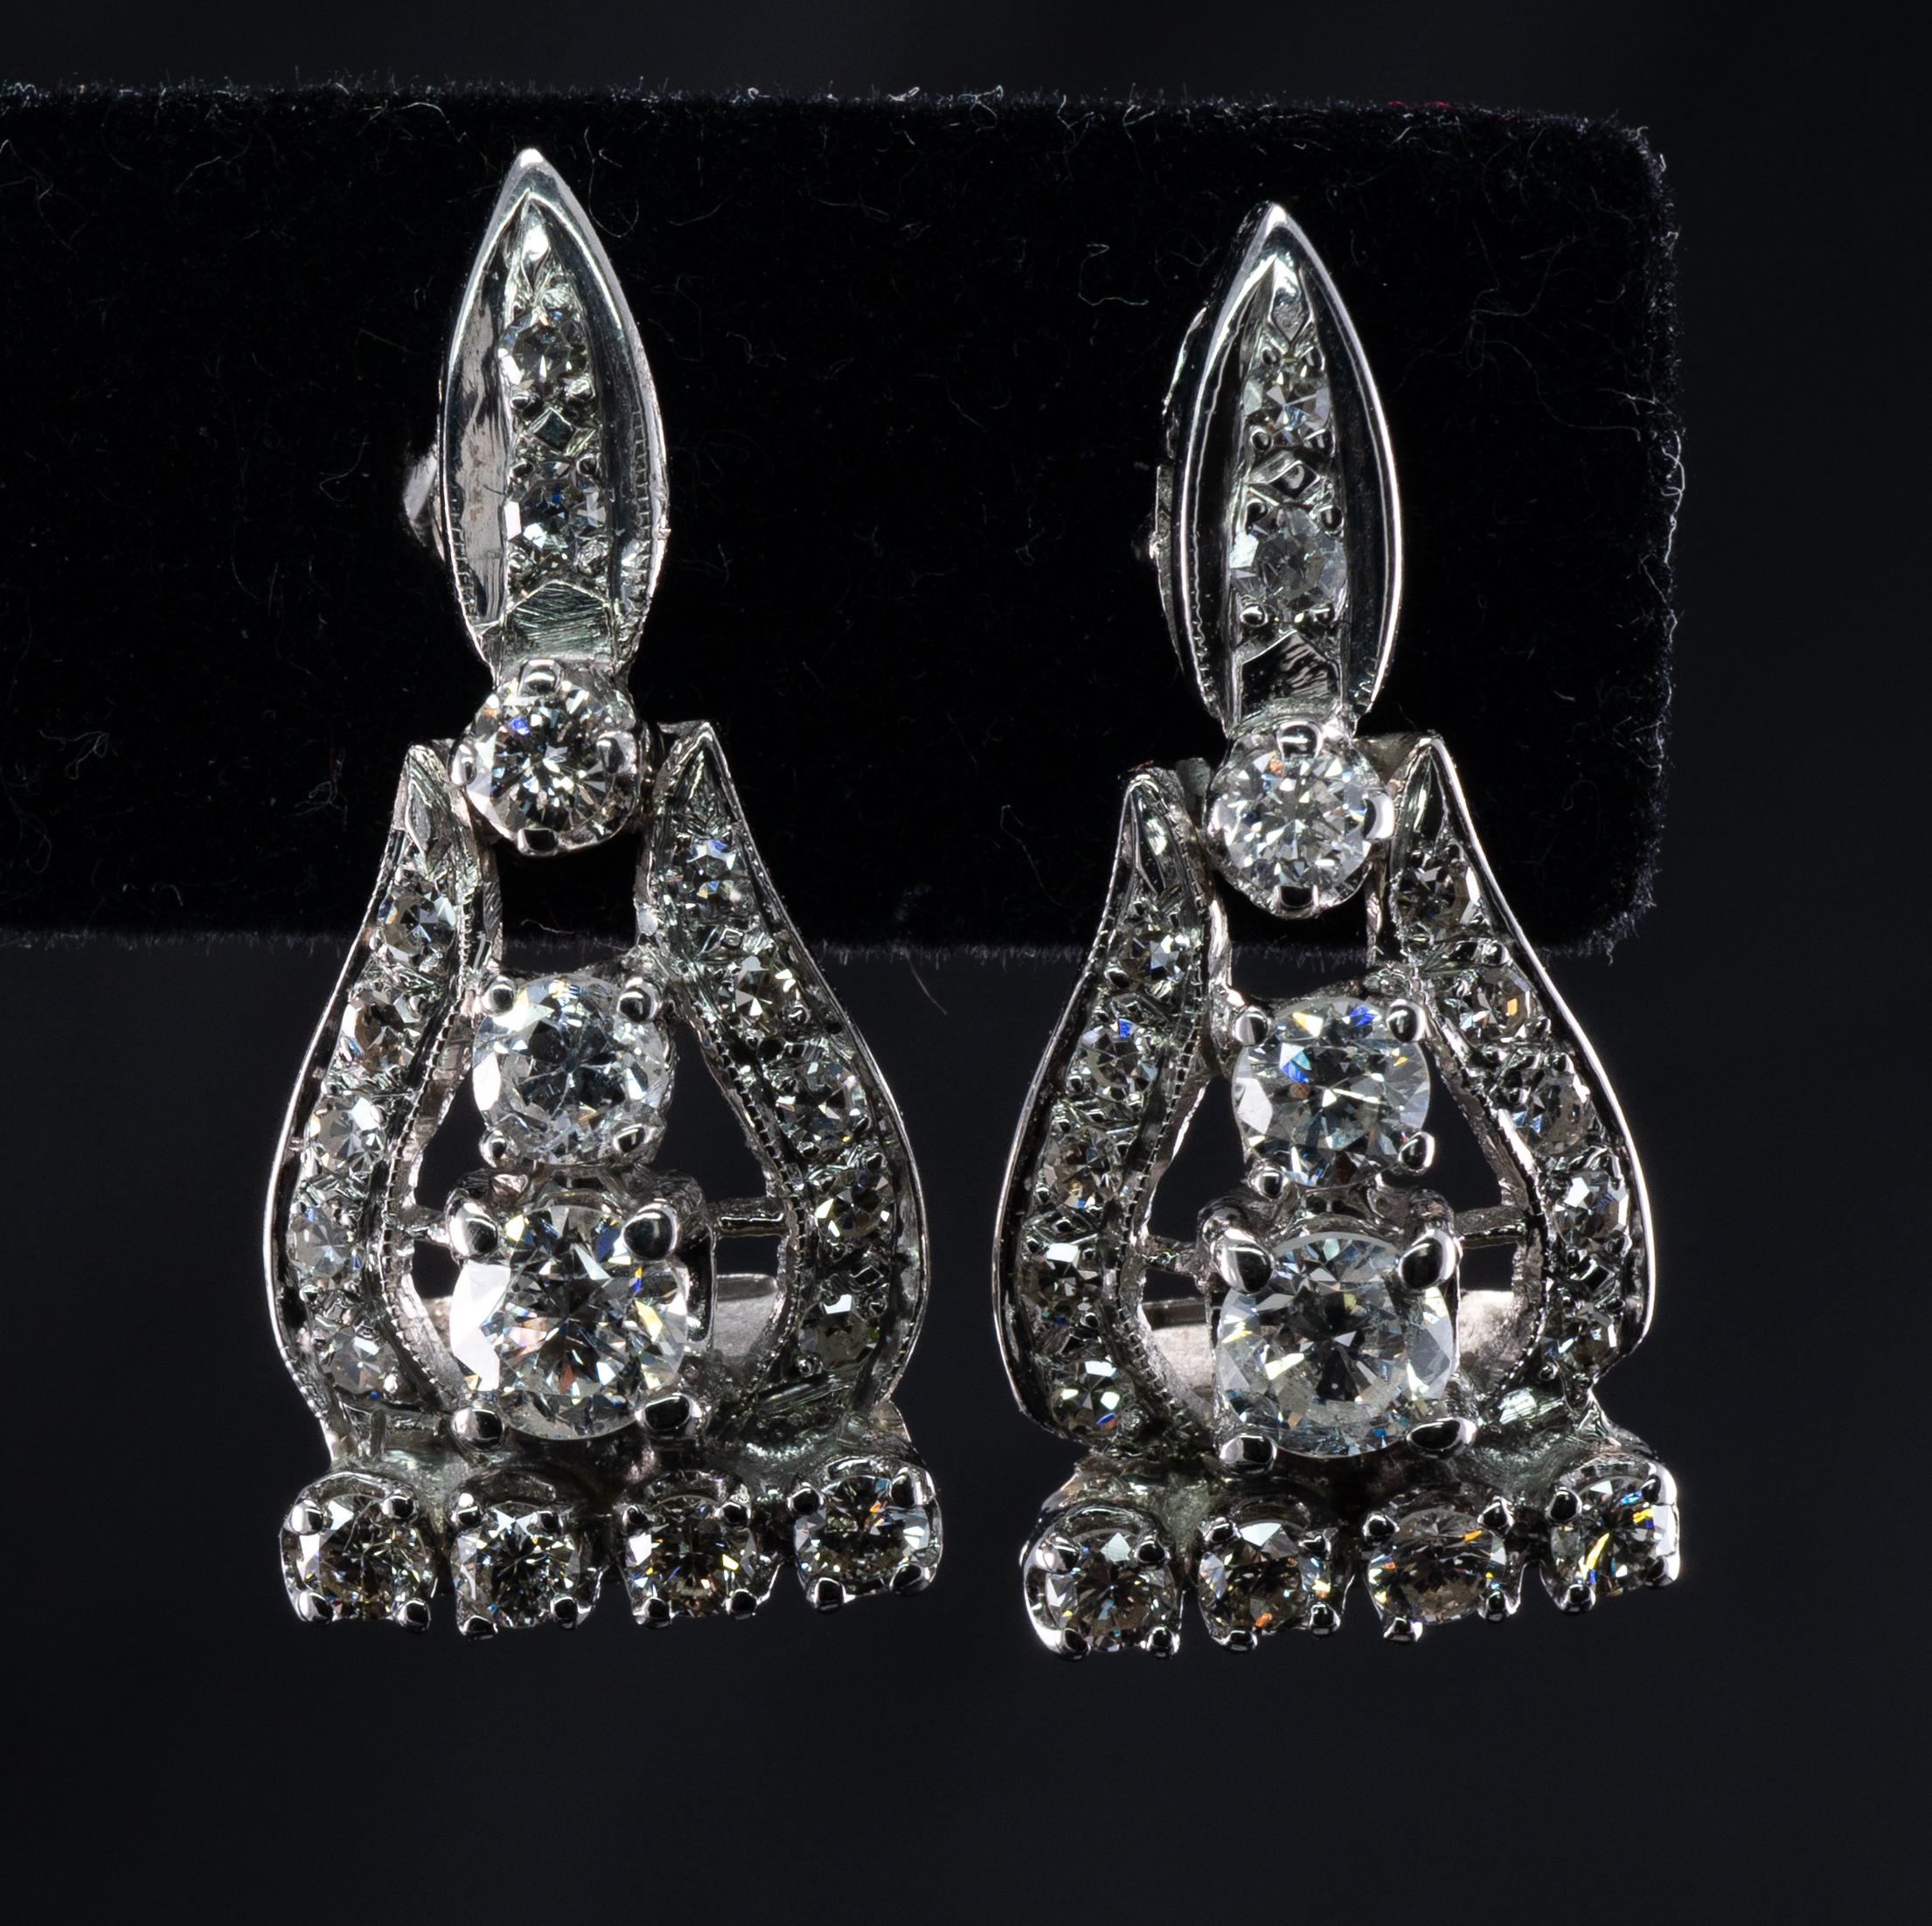 Natural Diamond Earrings Drop 14K White Gold 1.72 ct 

These vintage earrings are crafted in solid 14K White Gold (tested and guaranteed).
Each earring holds 19 round and singe cut diamonds.
The larger diamond is .23 carat and the smallest is 0.015